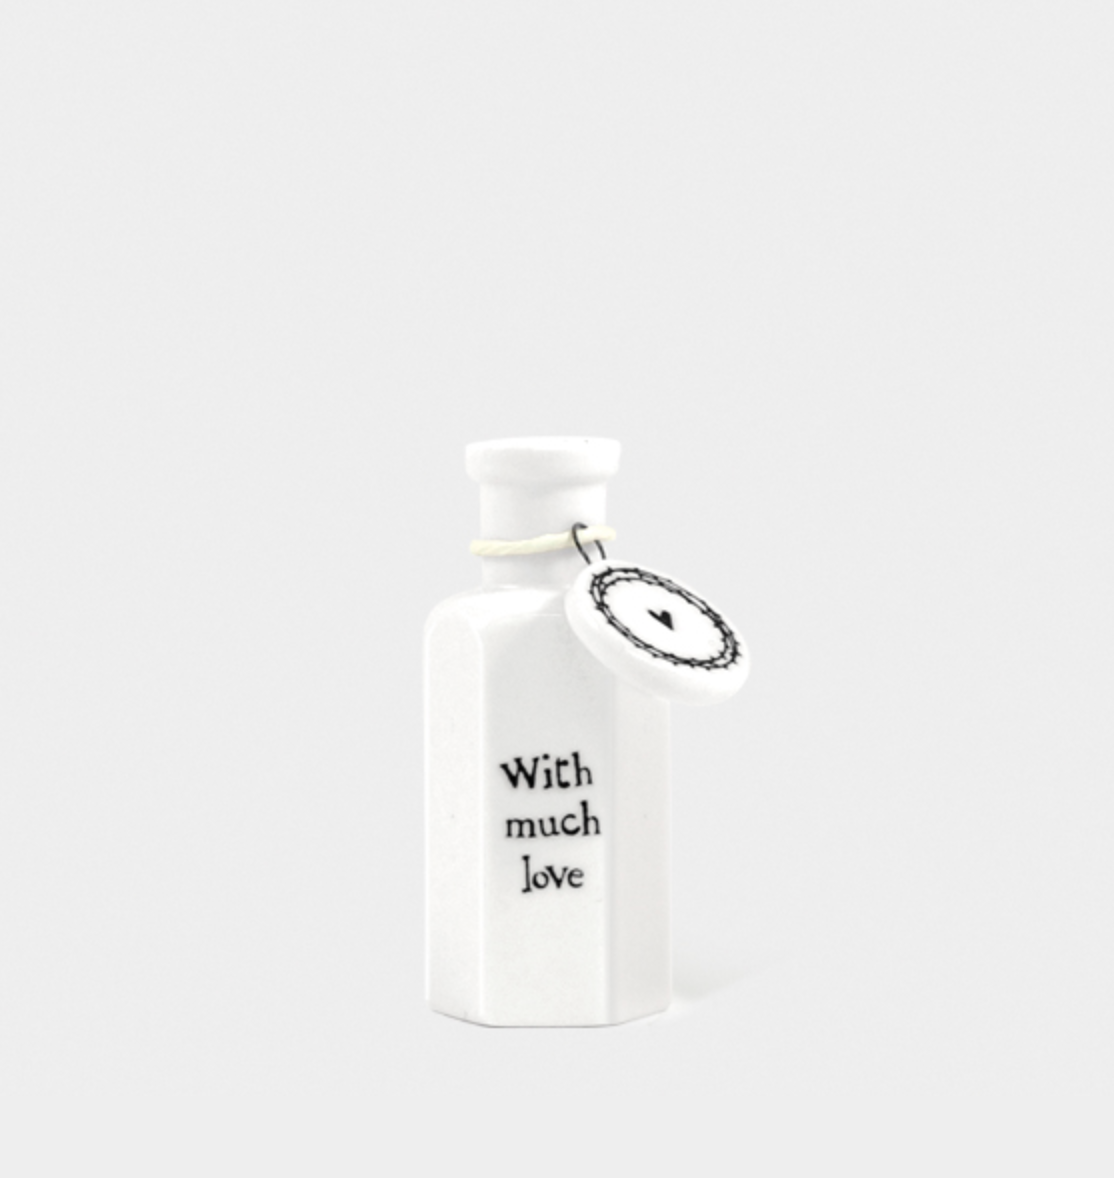 East of India Hexagonal Porcelain Bottle - "With much love..."